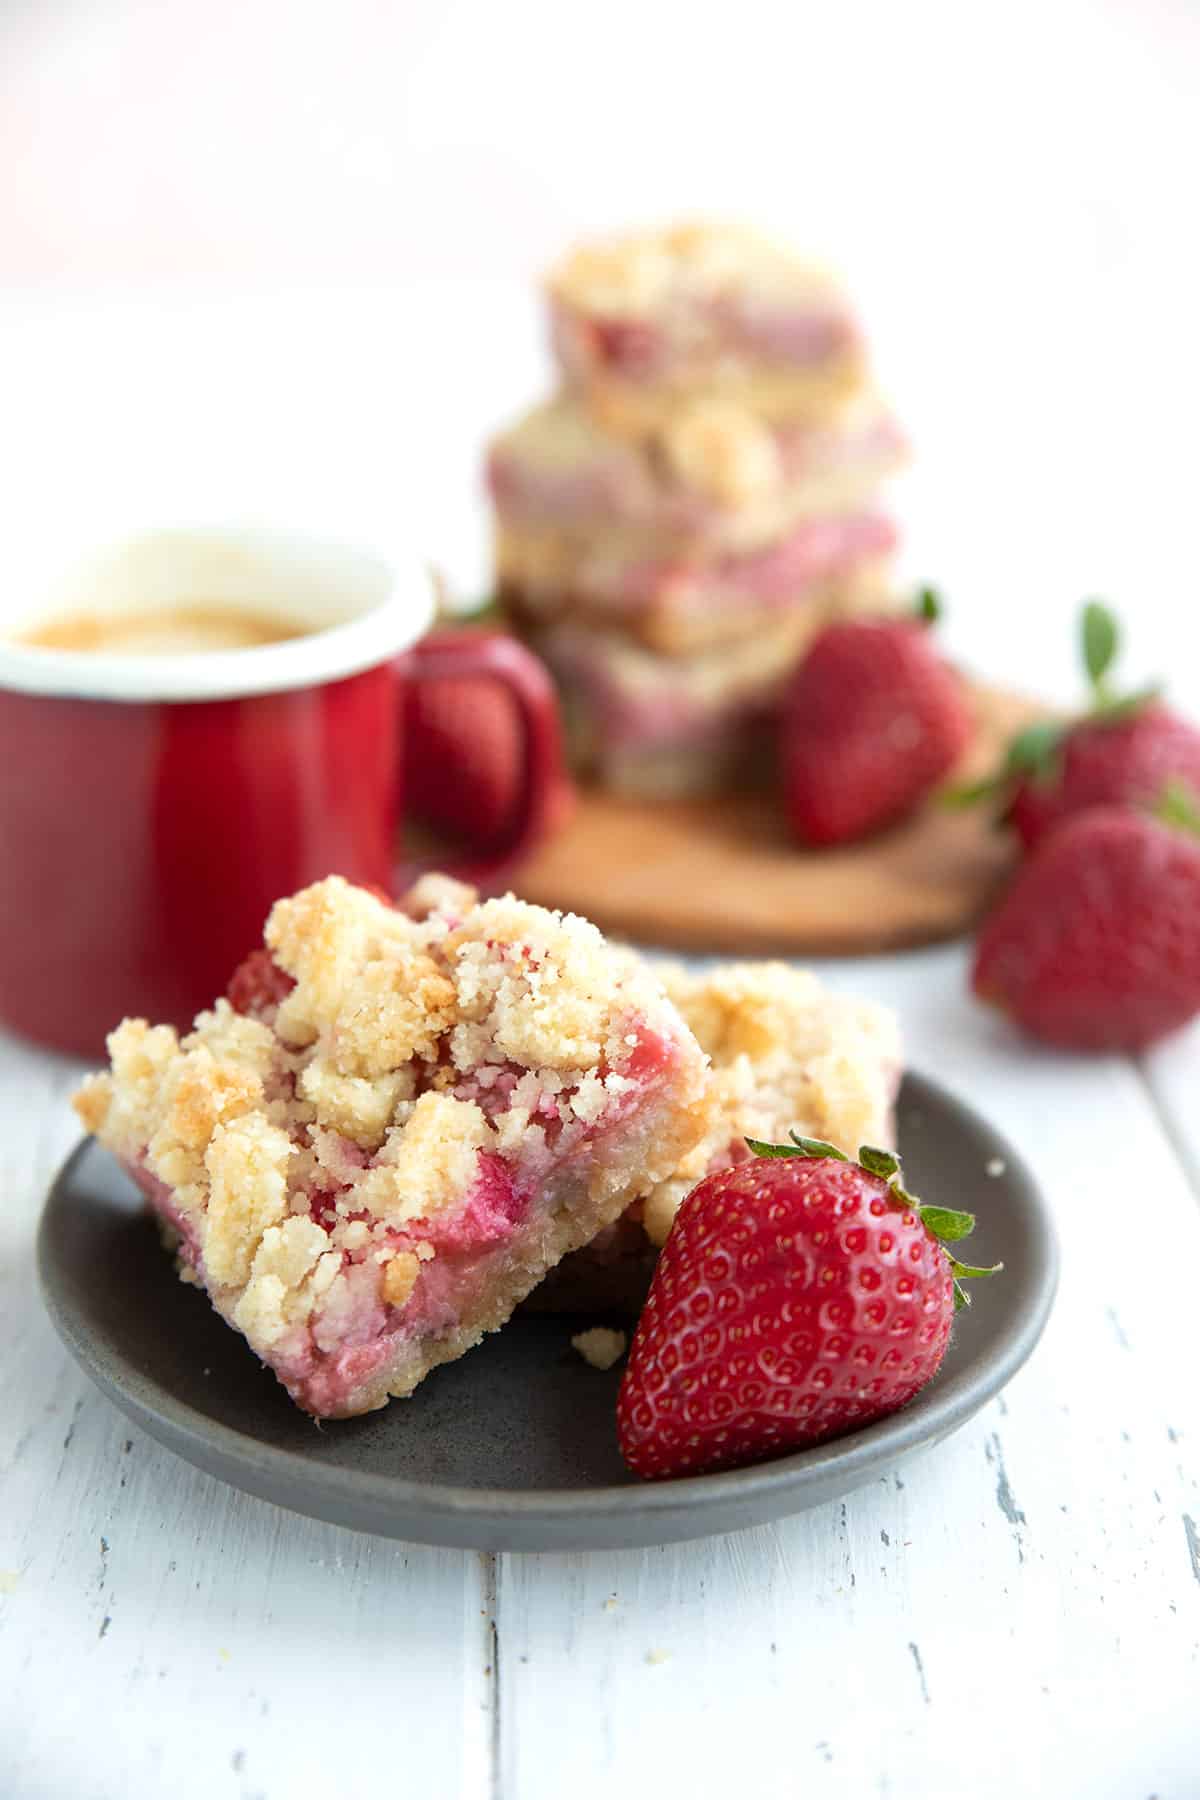 Two strawberry rhubarb crumb bars on a small gray plate with a strawberry.